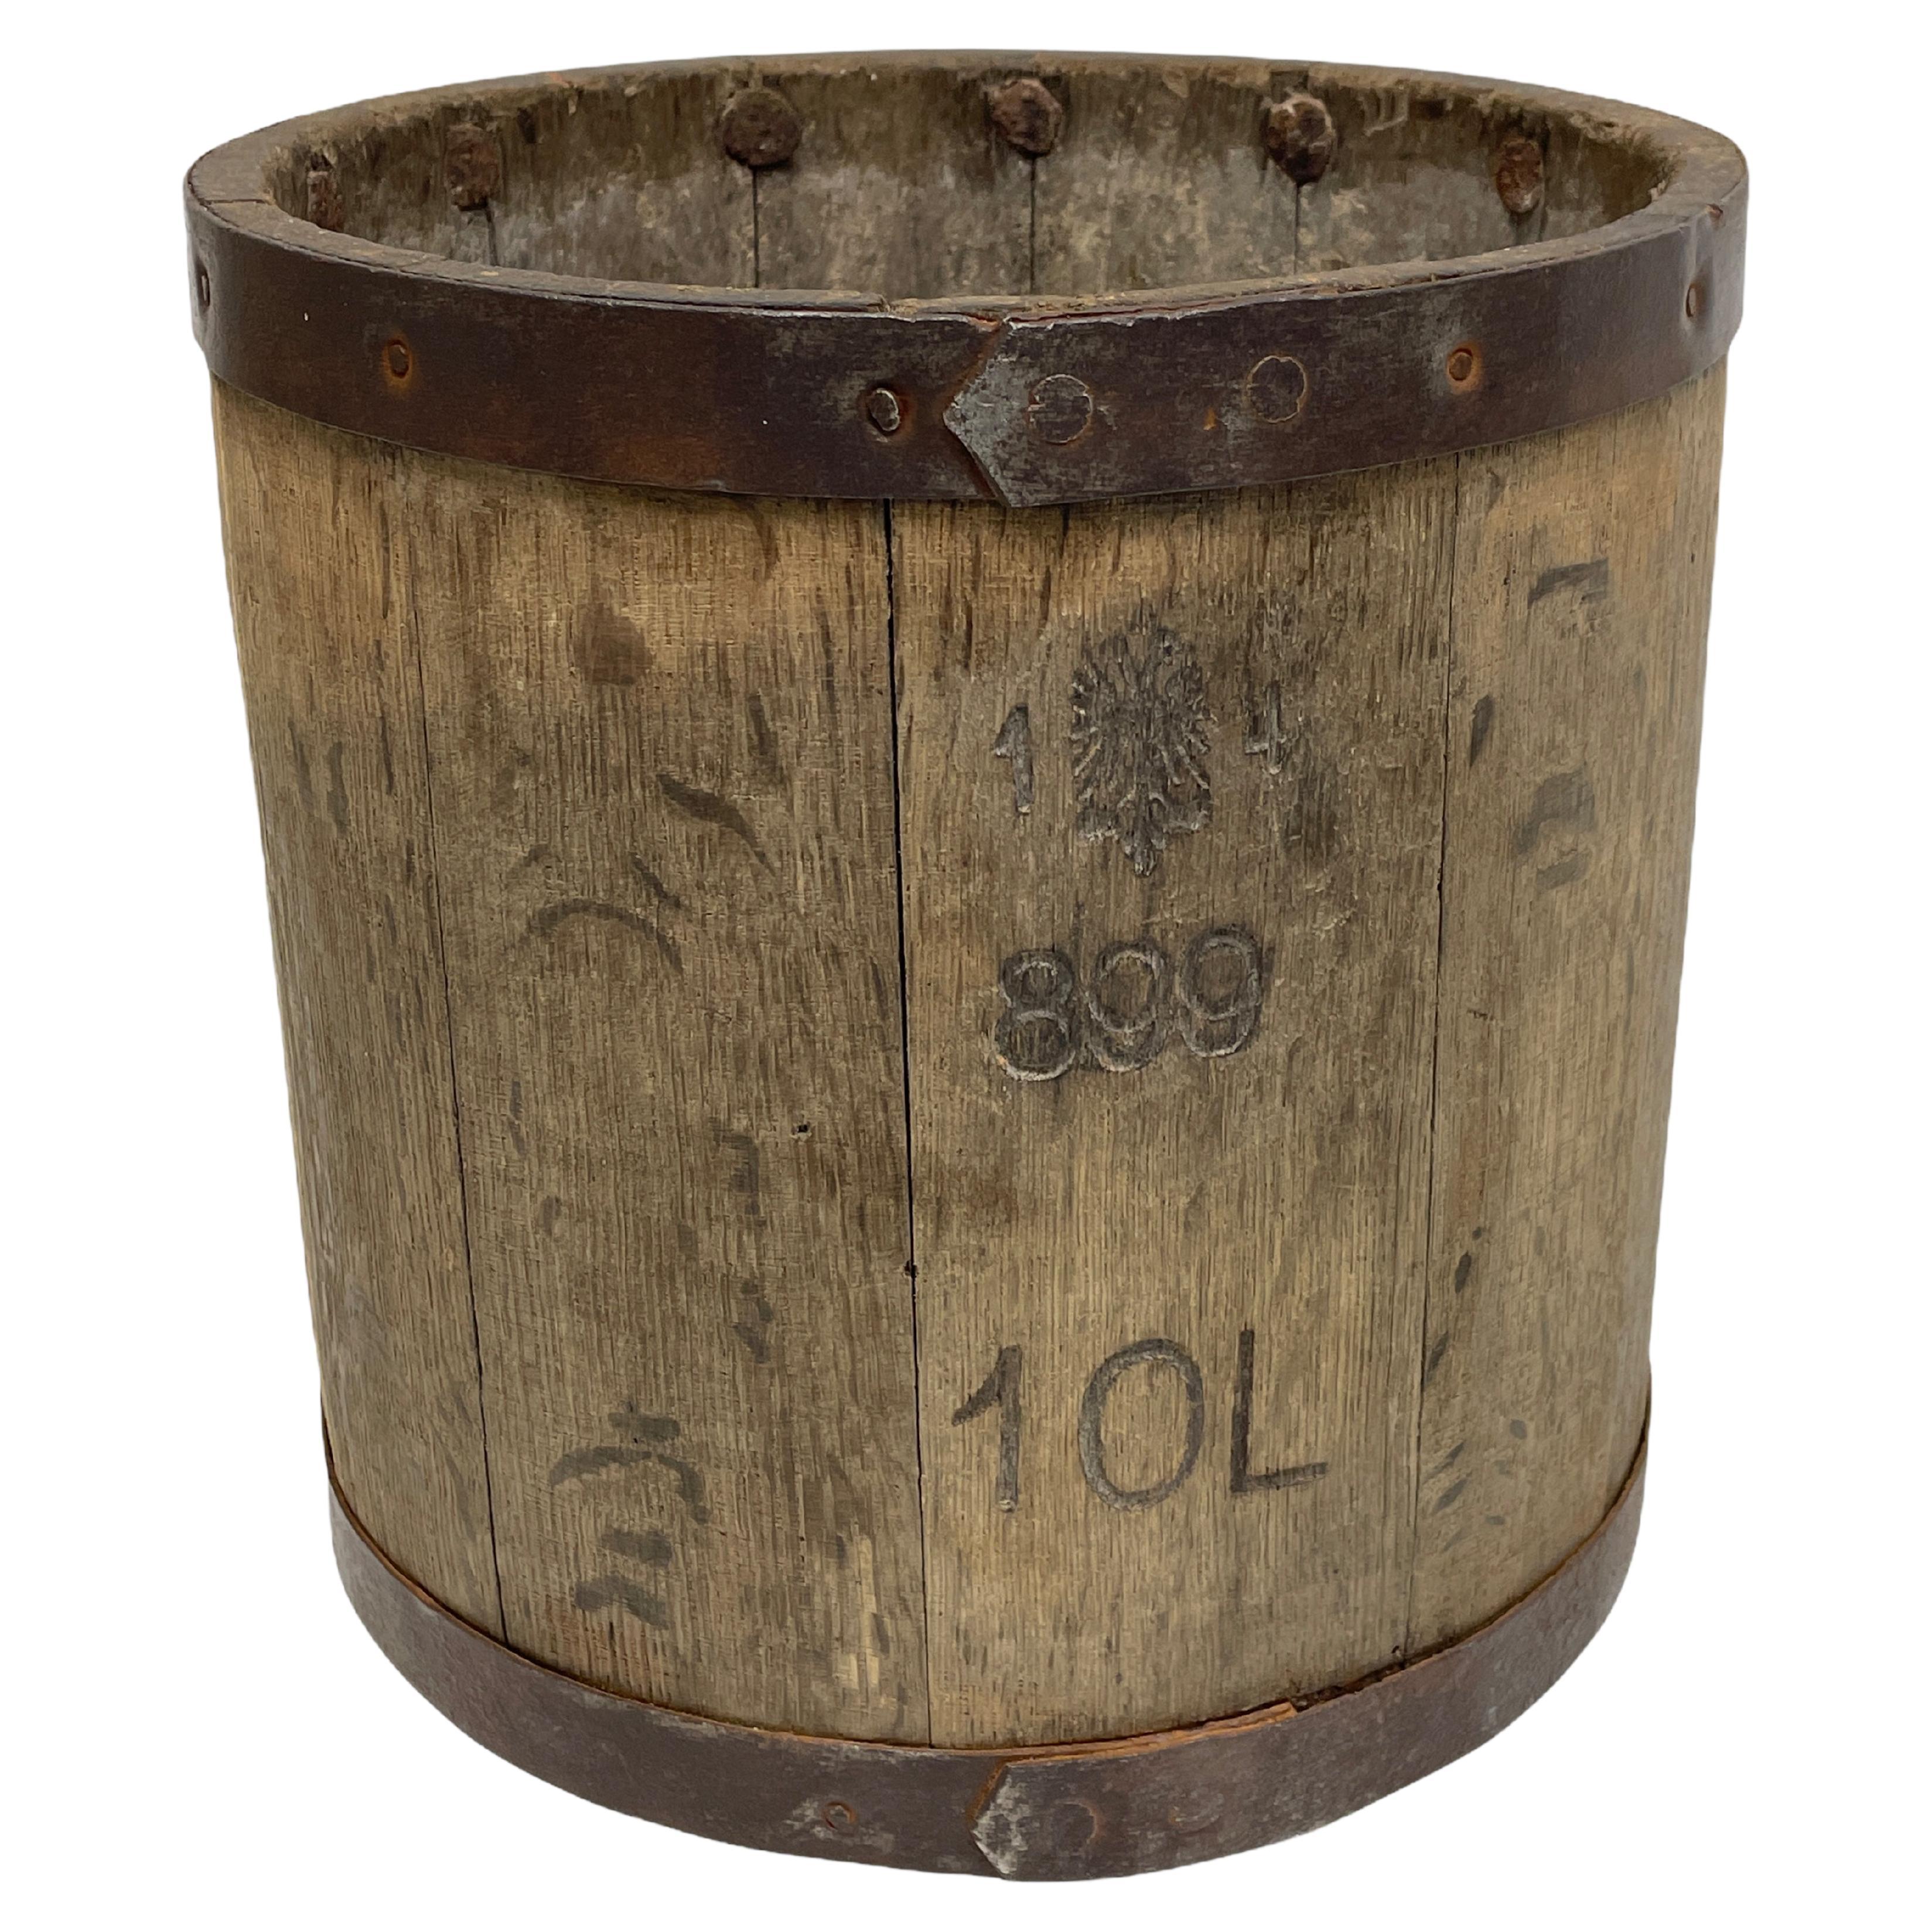 Wood Water Bucket with Wrought Iron Bands, Austria, 1890s